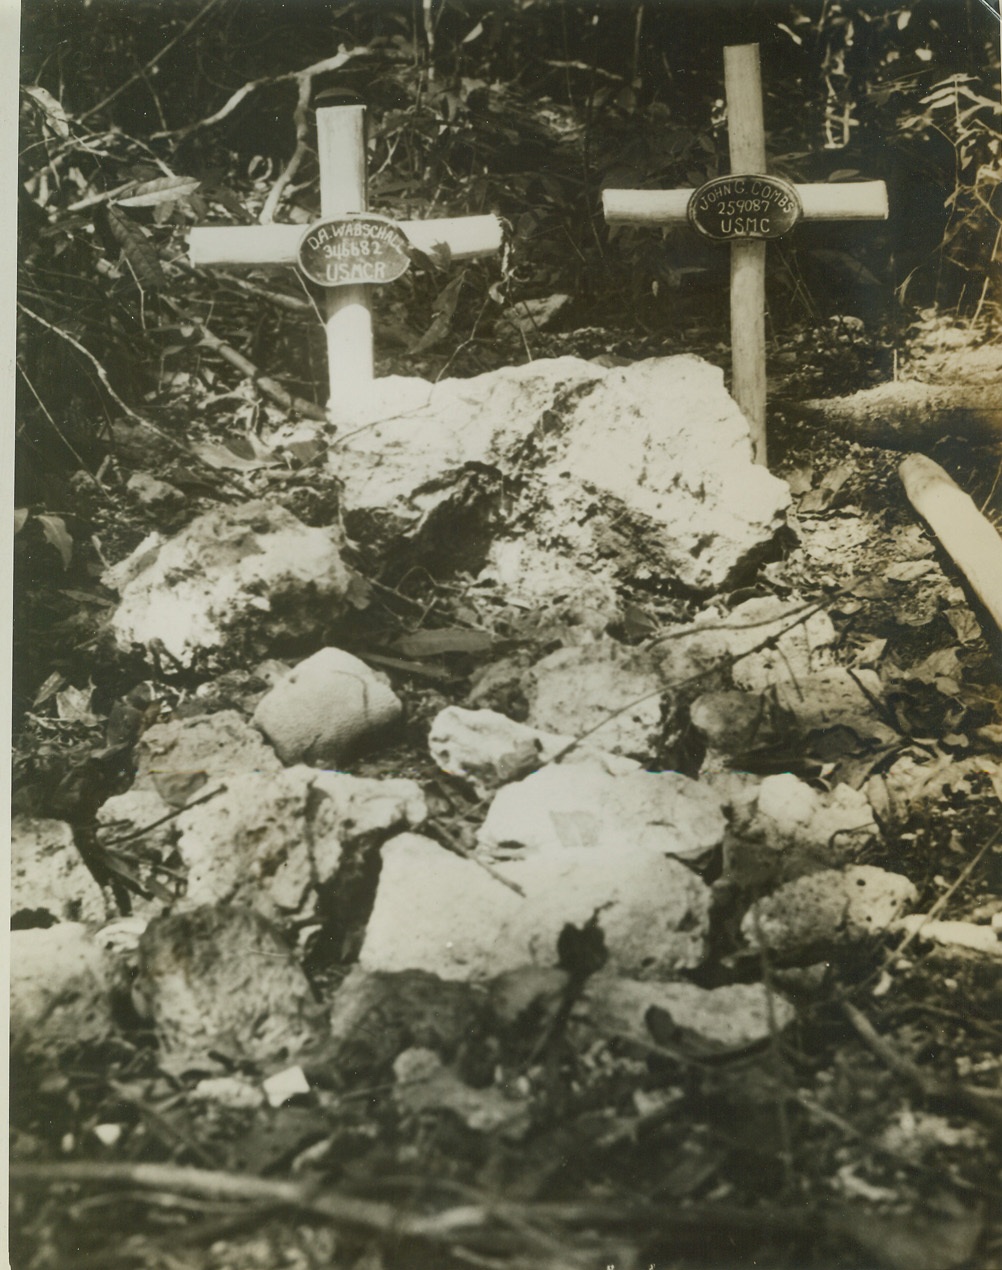 These are the dead, 9/24/1943. ENOGAI, NEW GUINEA - This is the last resting place of marines who gave their lives for their country during fighting in the Enogai jungle. Given a Christian burial by Marine Corps chaplains, the boys lie in neat graves marked with name plates made from captured Jap mess gear.;